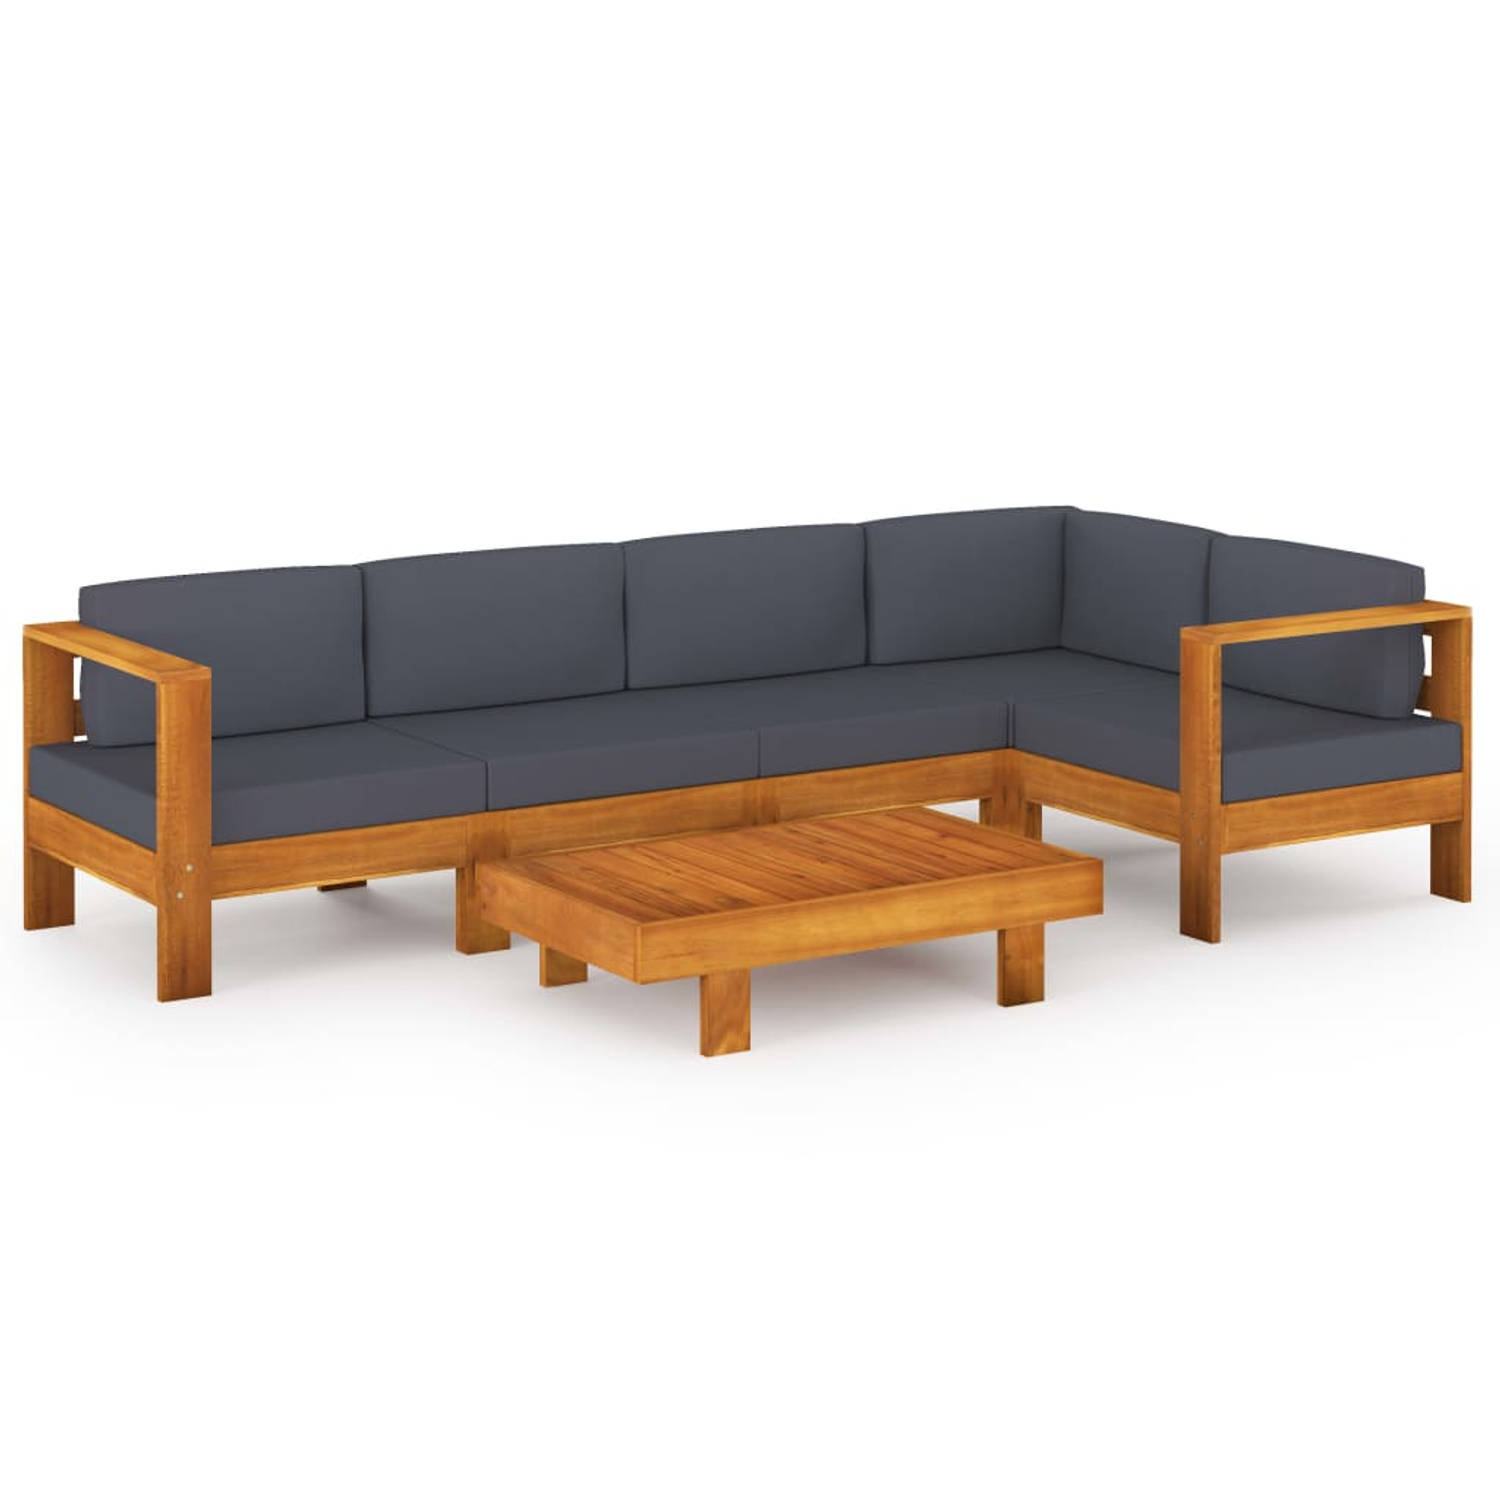 The Living Store Houten Loungeset - Tuinmeubelset - Massief Acaciahout - Donkergrijs kussen - Afmeting- 100 x 60 x 25 cm